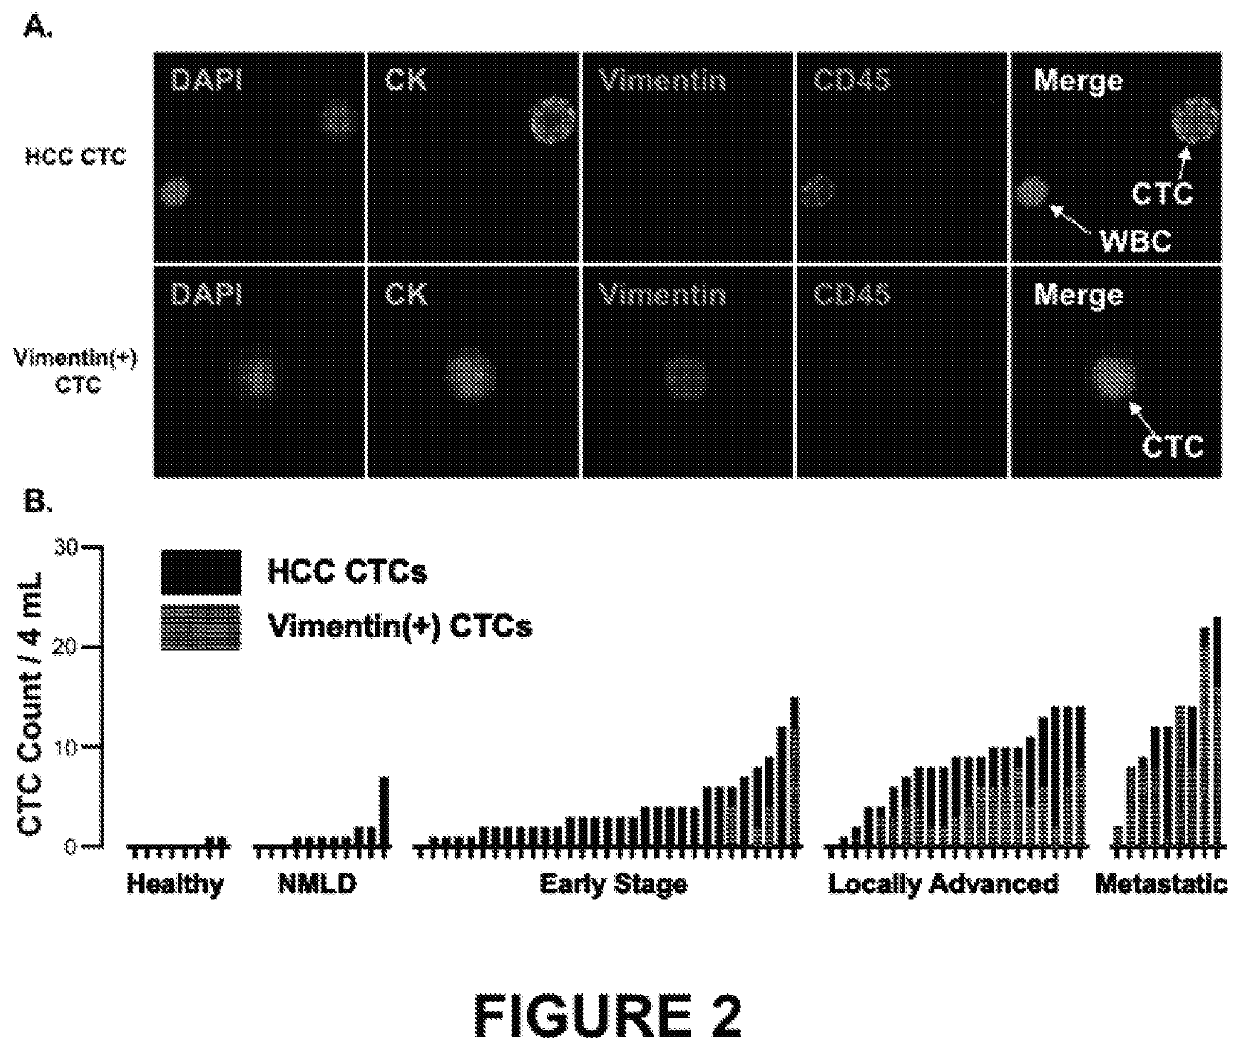 Phenotypic profiling of hepatocellular carcinoma circulating tumor cells for treatment selection